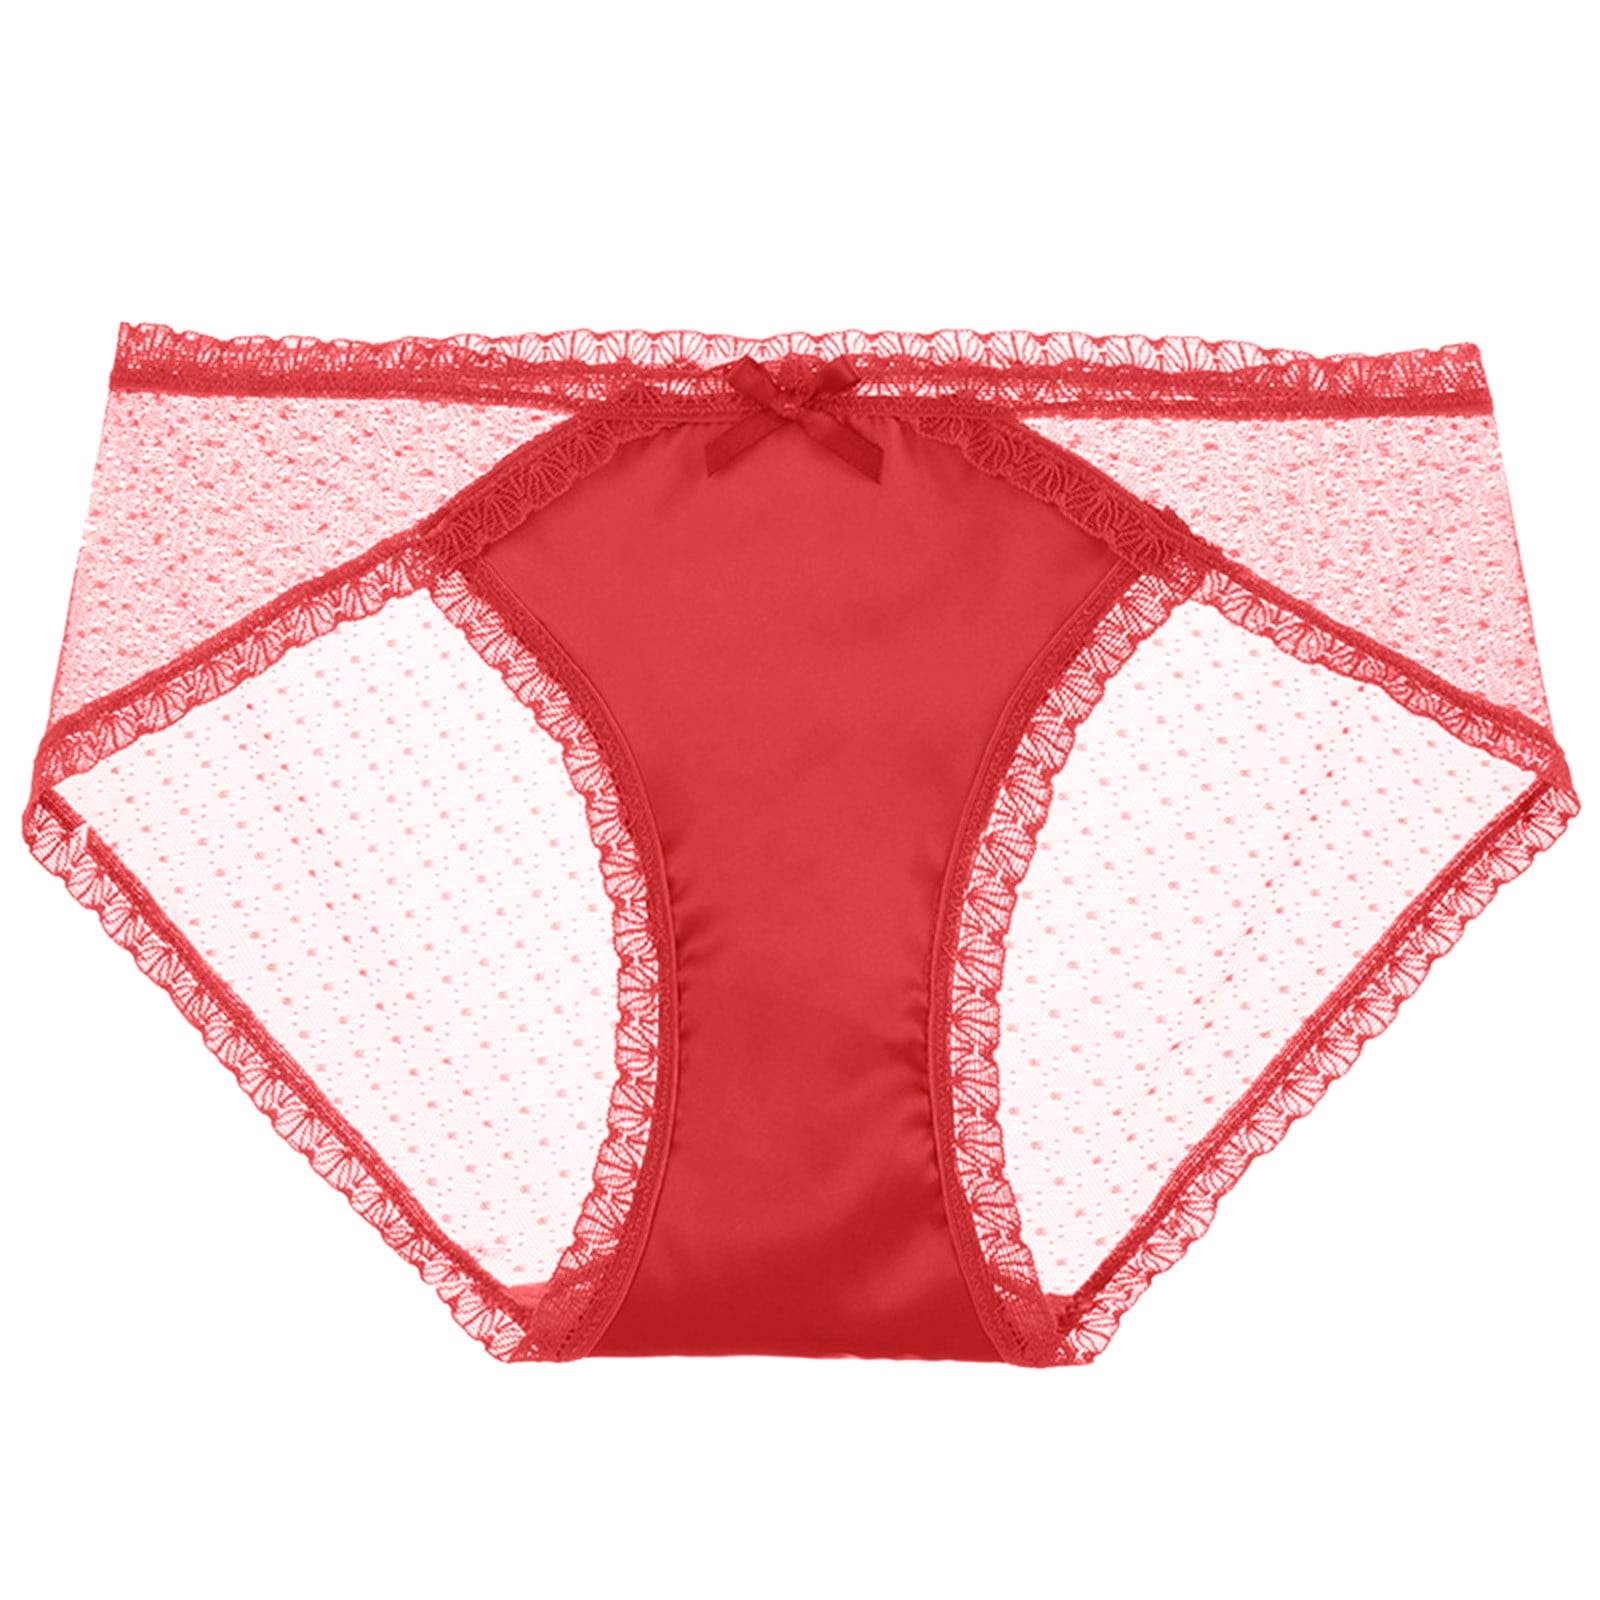 Zuwimk G String Thongs For Women,Womens Silk Satin Thong Panties Lace G  String Thong T Back Shiny Satin Underwear Red,One Size 